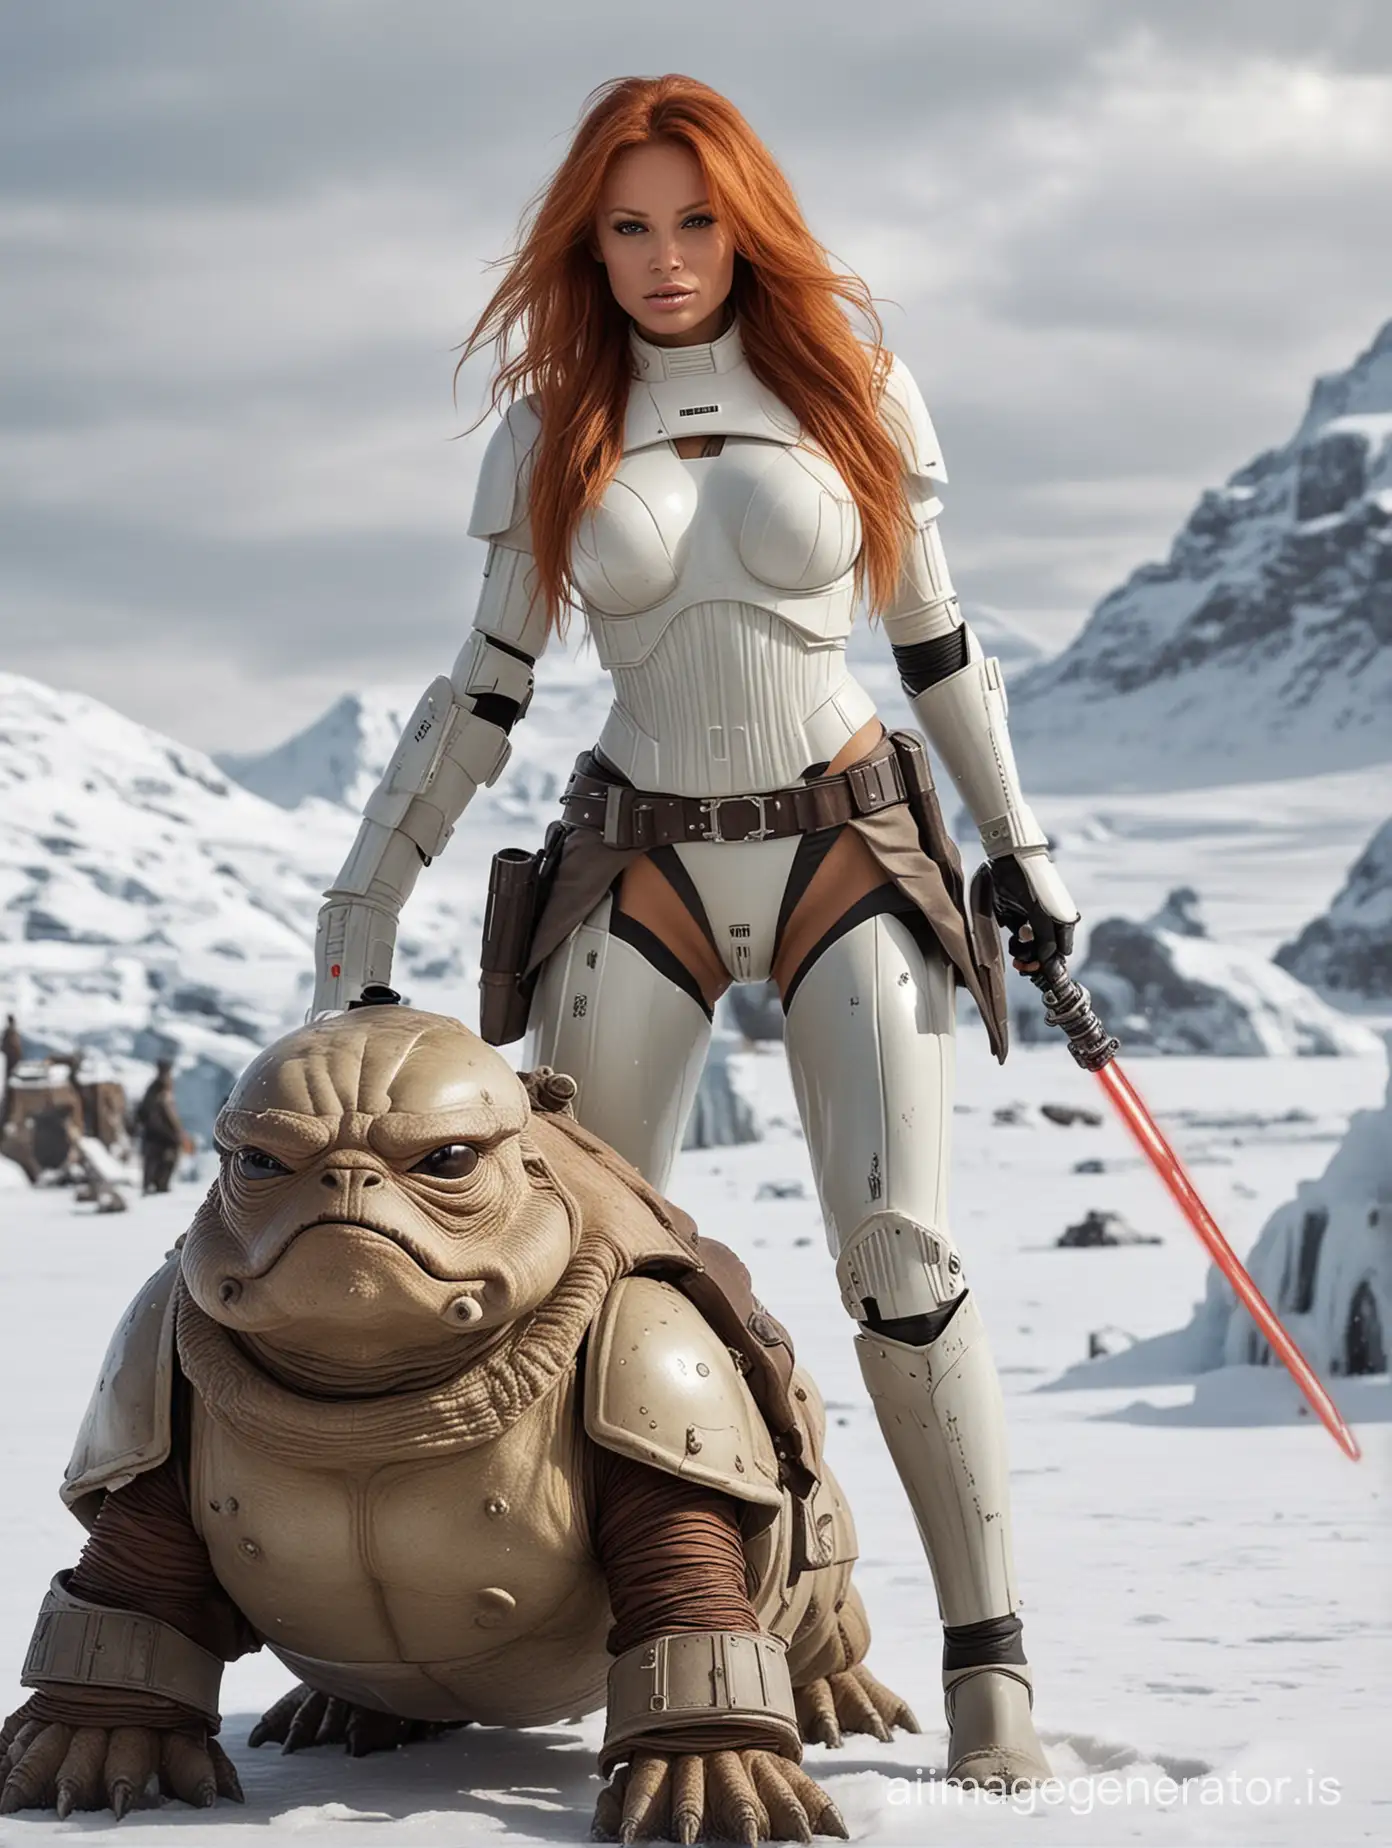 Young-Pamela-Anderson-Riding-Jabba-the-Hutt-with-Star-Wars-Characters-in-Frozen-Arctic